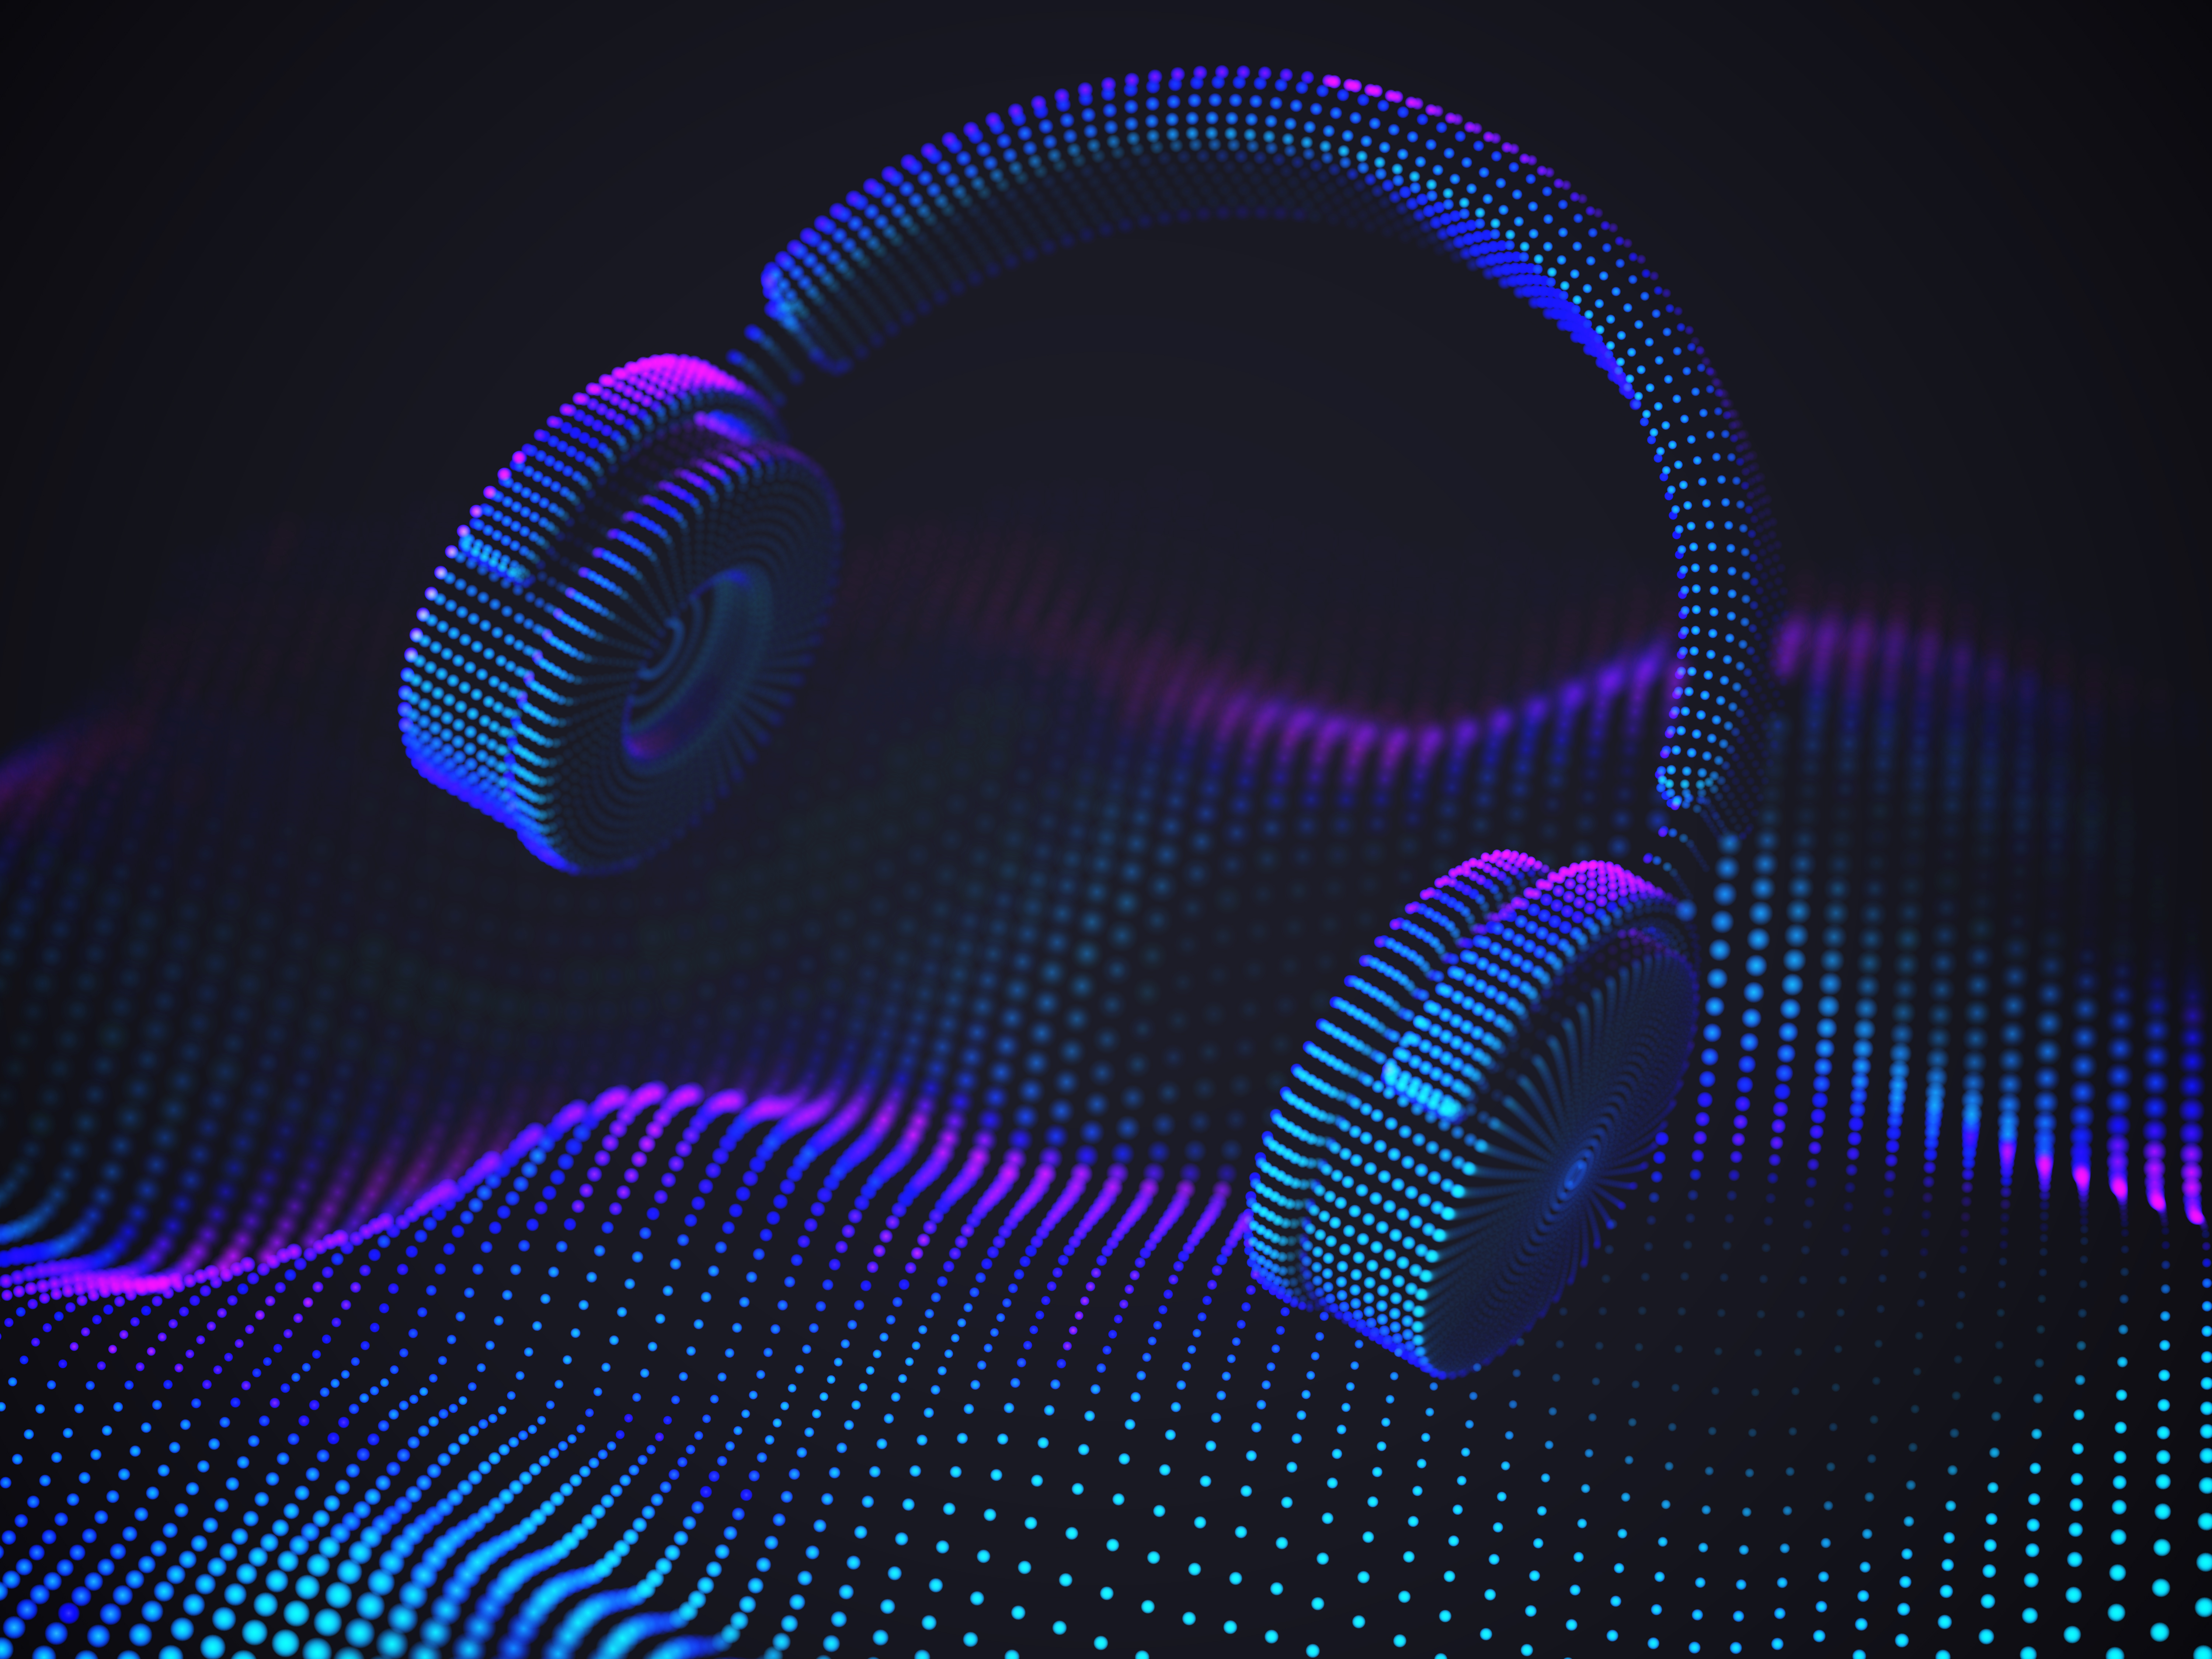 A image of headphones with a rhythmic background